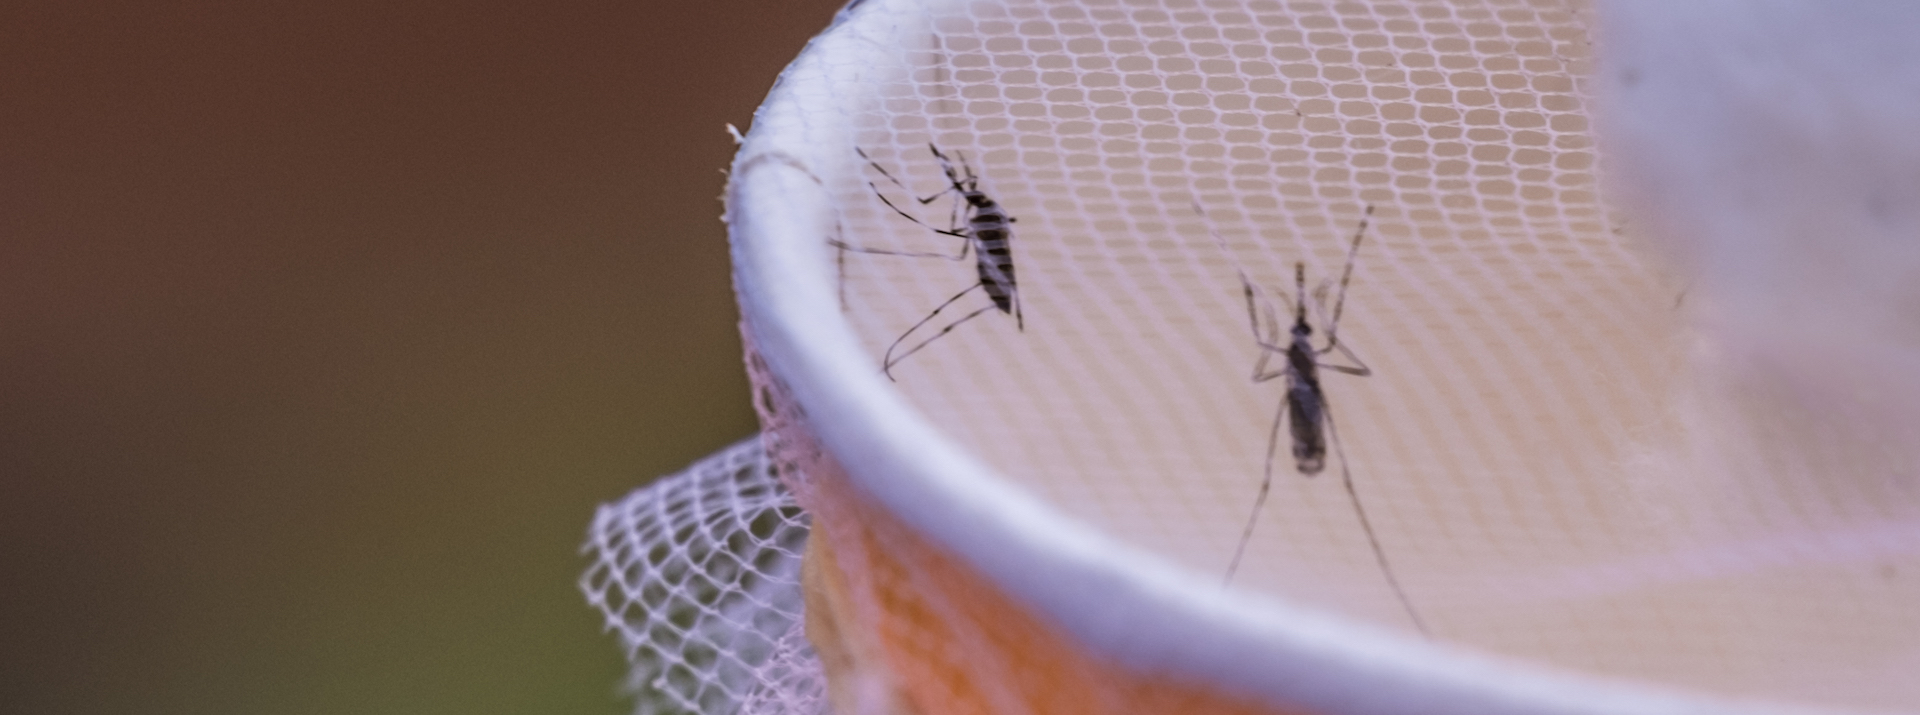 Getting malaria prevention back on track